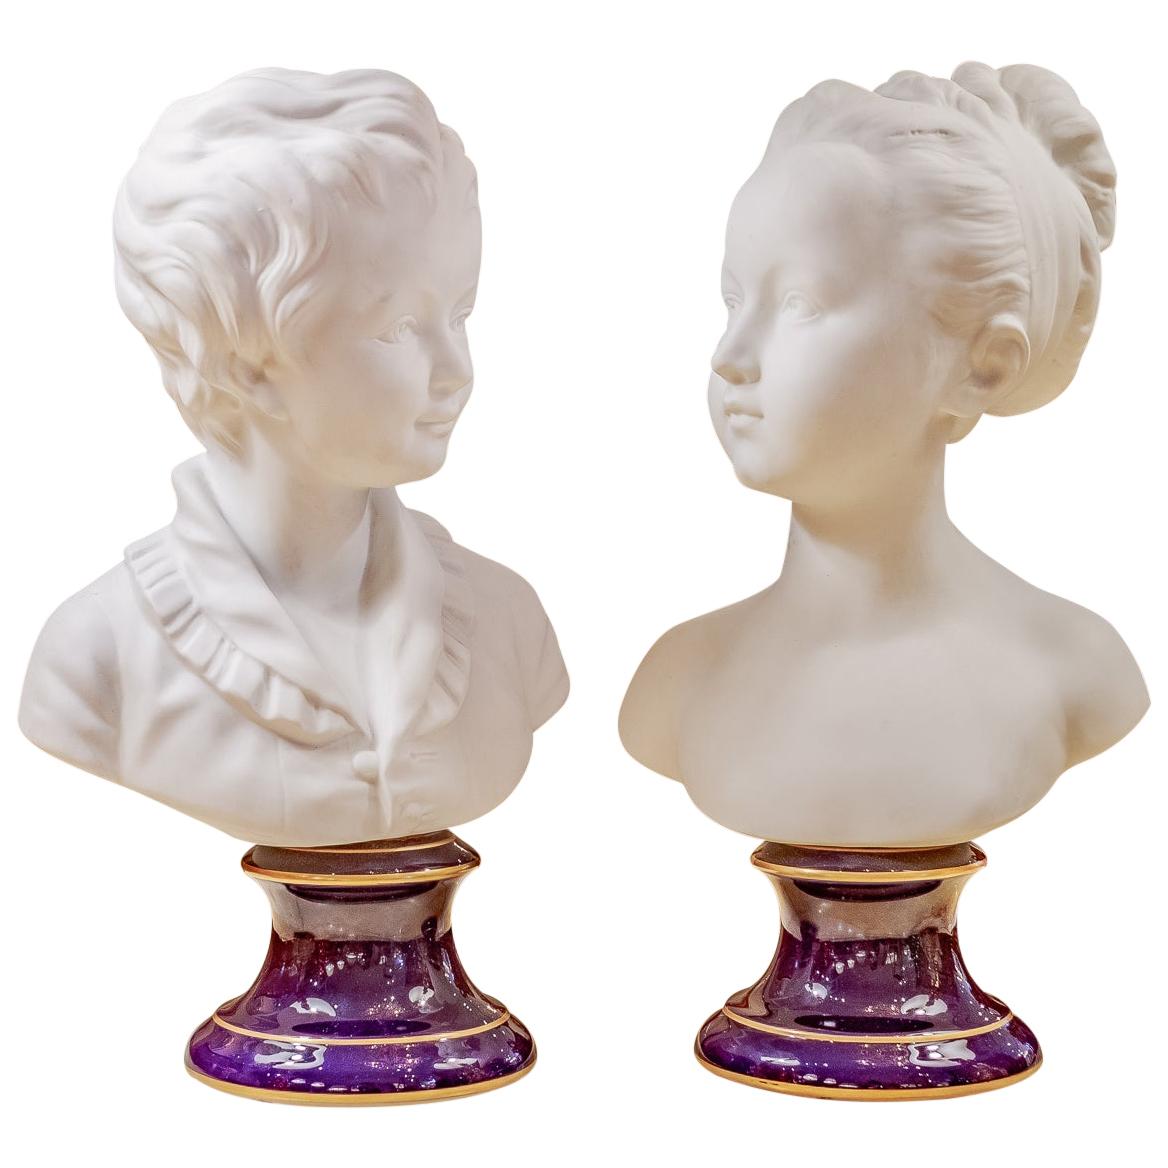 Beautiful Pair of Late 19th Century French Limoges Porcelain Busts on Sevres